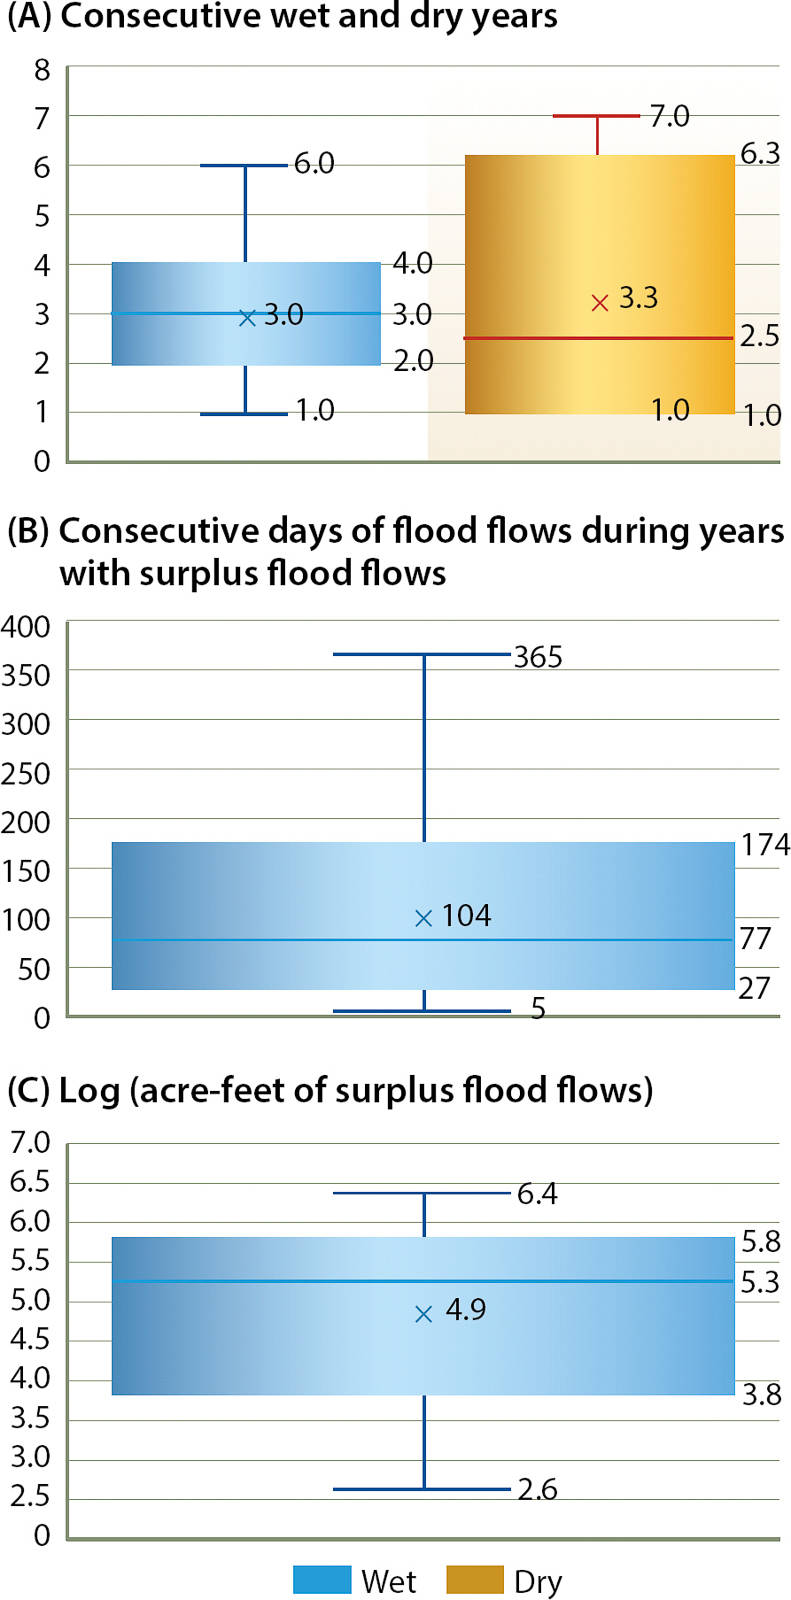 Surplus flood flows past the James Weir on average have occurred every 2 years. However, wet and dry years are typically grouped with 2 to 4 consecutive wet years followed by 1 to 6 consecutive dry years. During wet years, flooding typically last from 1 to 6 months, with an average duration of 3.5 months and a median duration of 2.5 months. Large volumes of water flow through the James Bypass during those flood periods: the median annual volume is 0.18 MAF while the 75th percentile is 0.60 MAF. Graphs show min and max (whiskers), mean (x), 25th and 75th quartiles (box) and median (line). Source: USGS 2010.